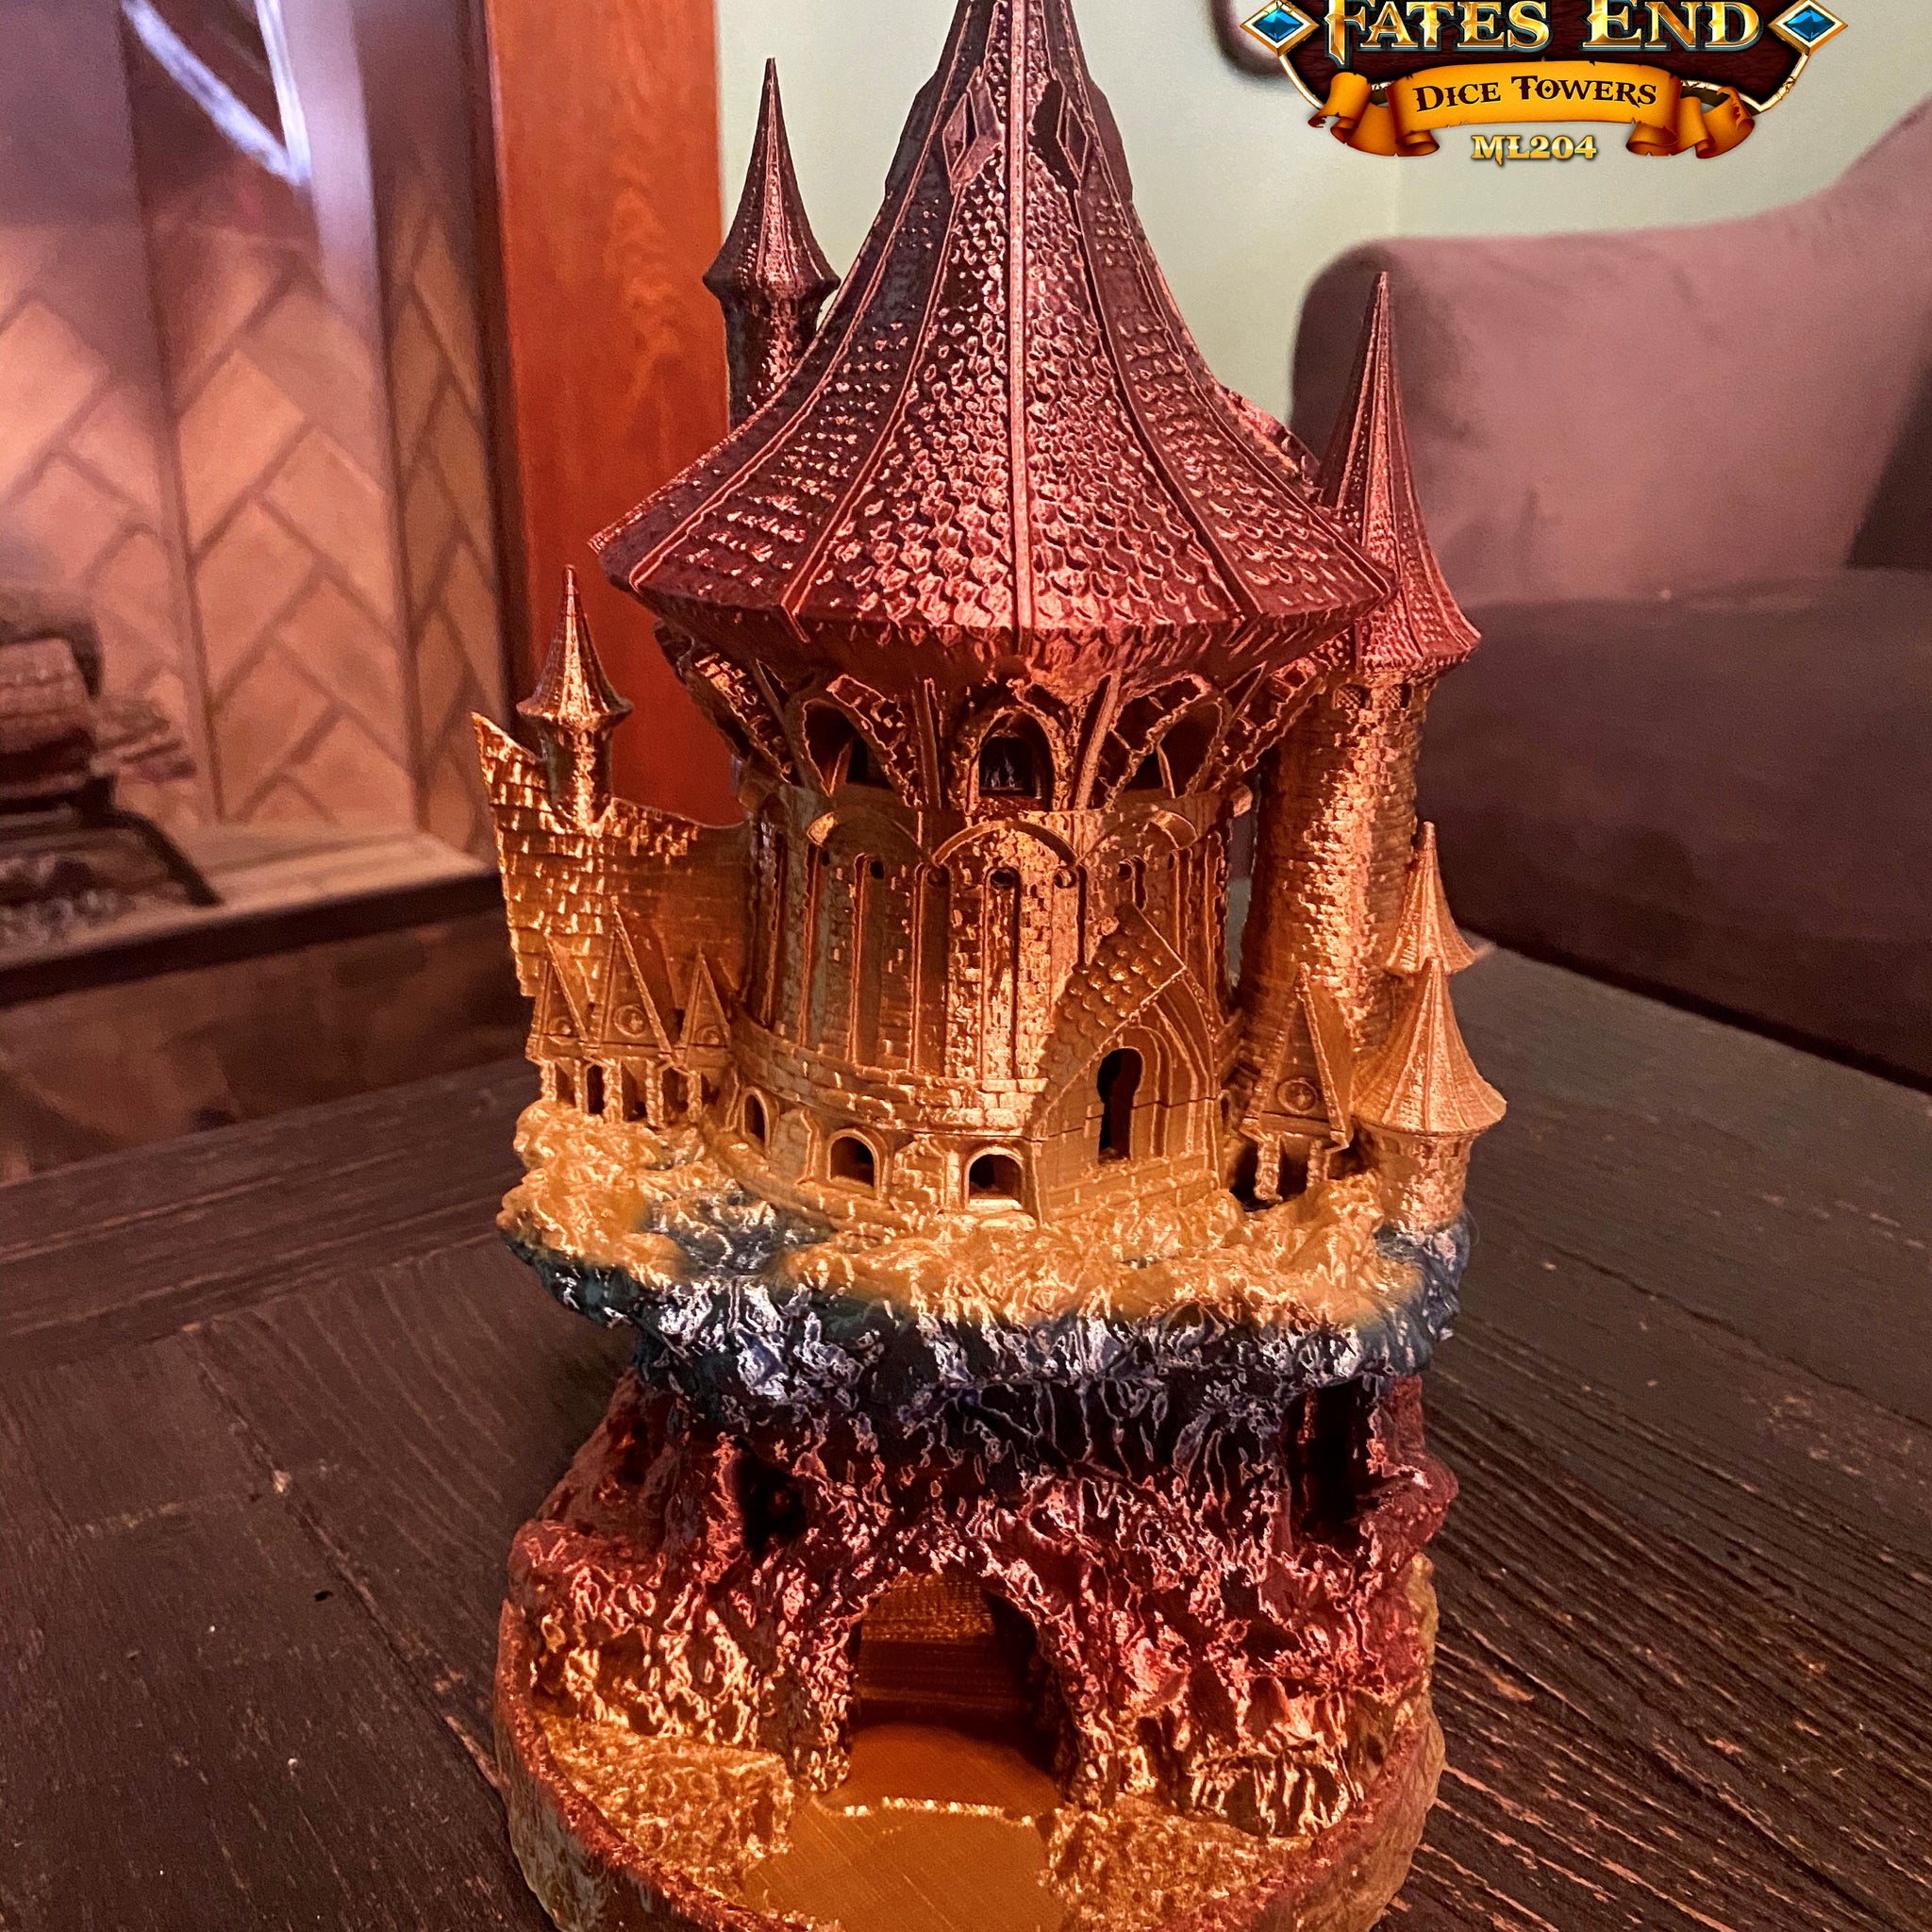 Fates End Sorcerer Dice Tower